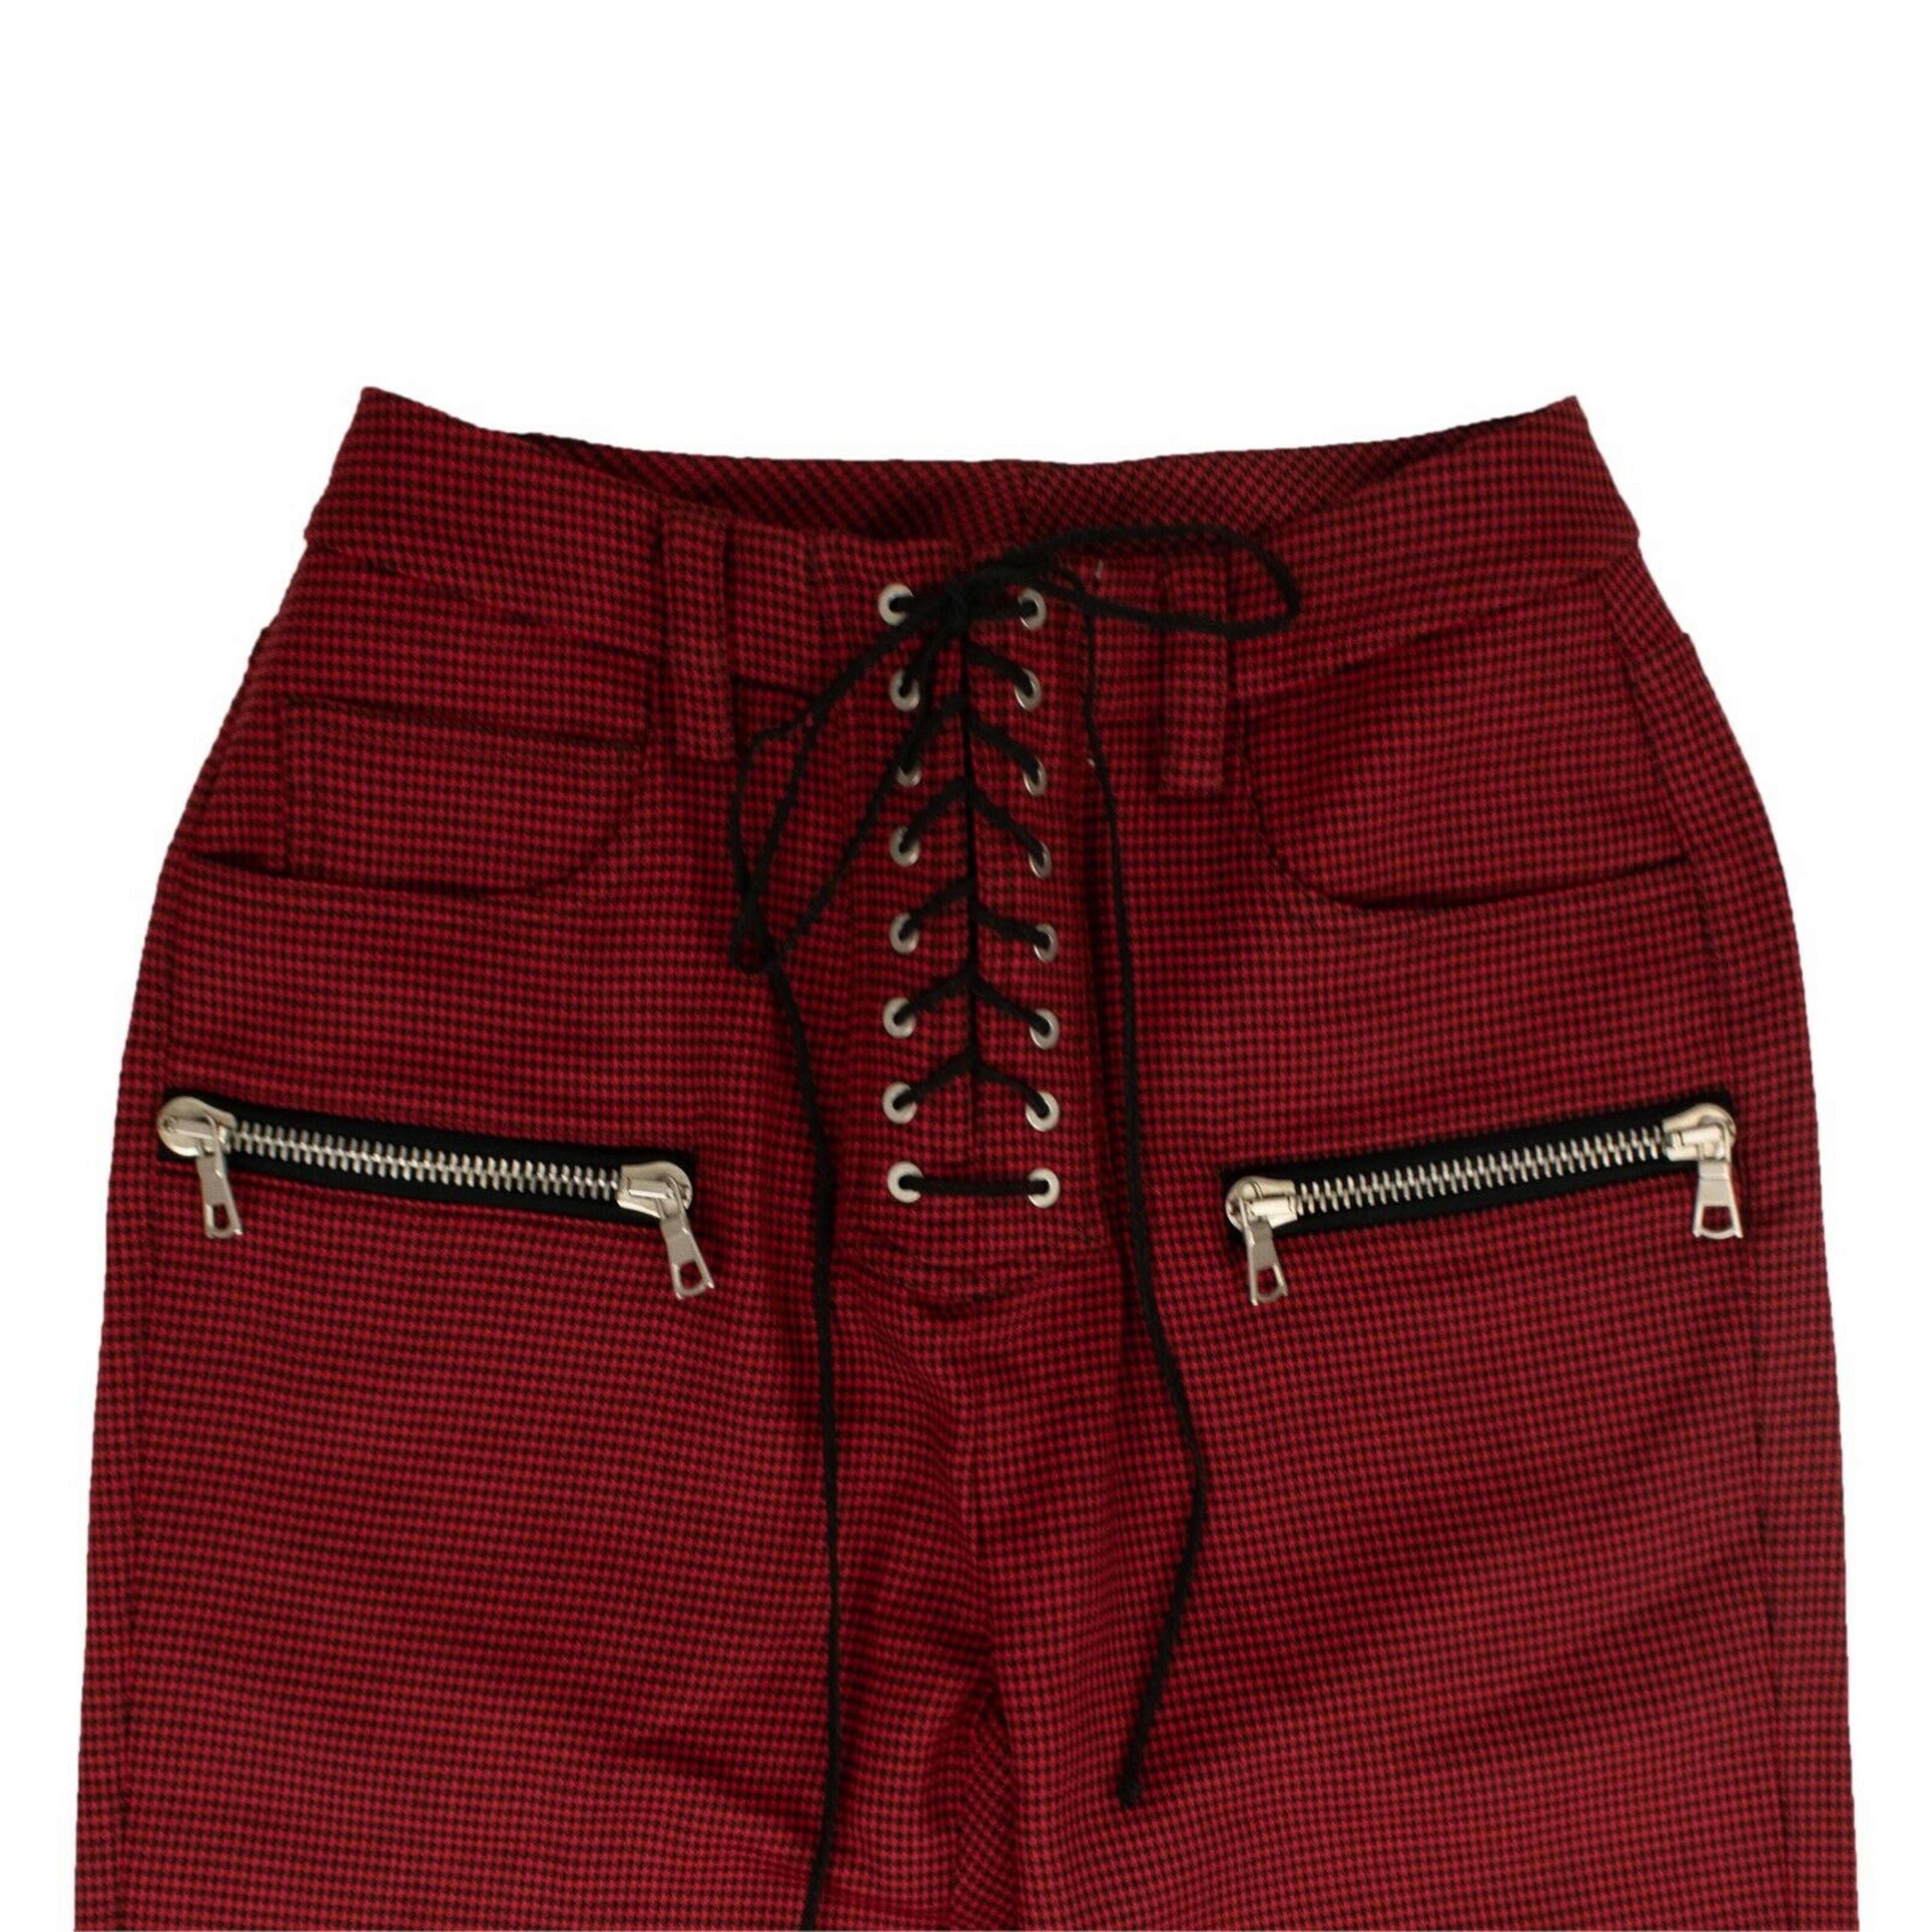 Alternate View 2 of Red Houndstooth Print Pants